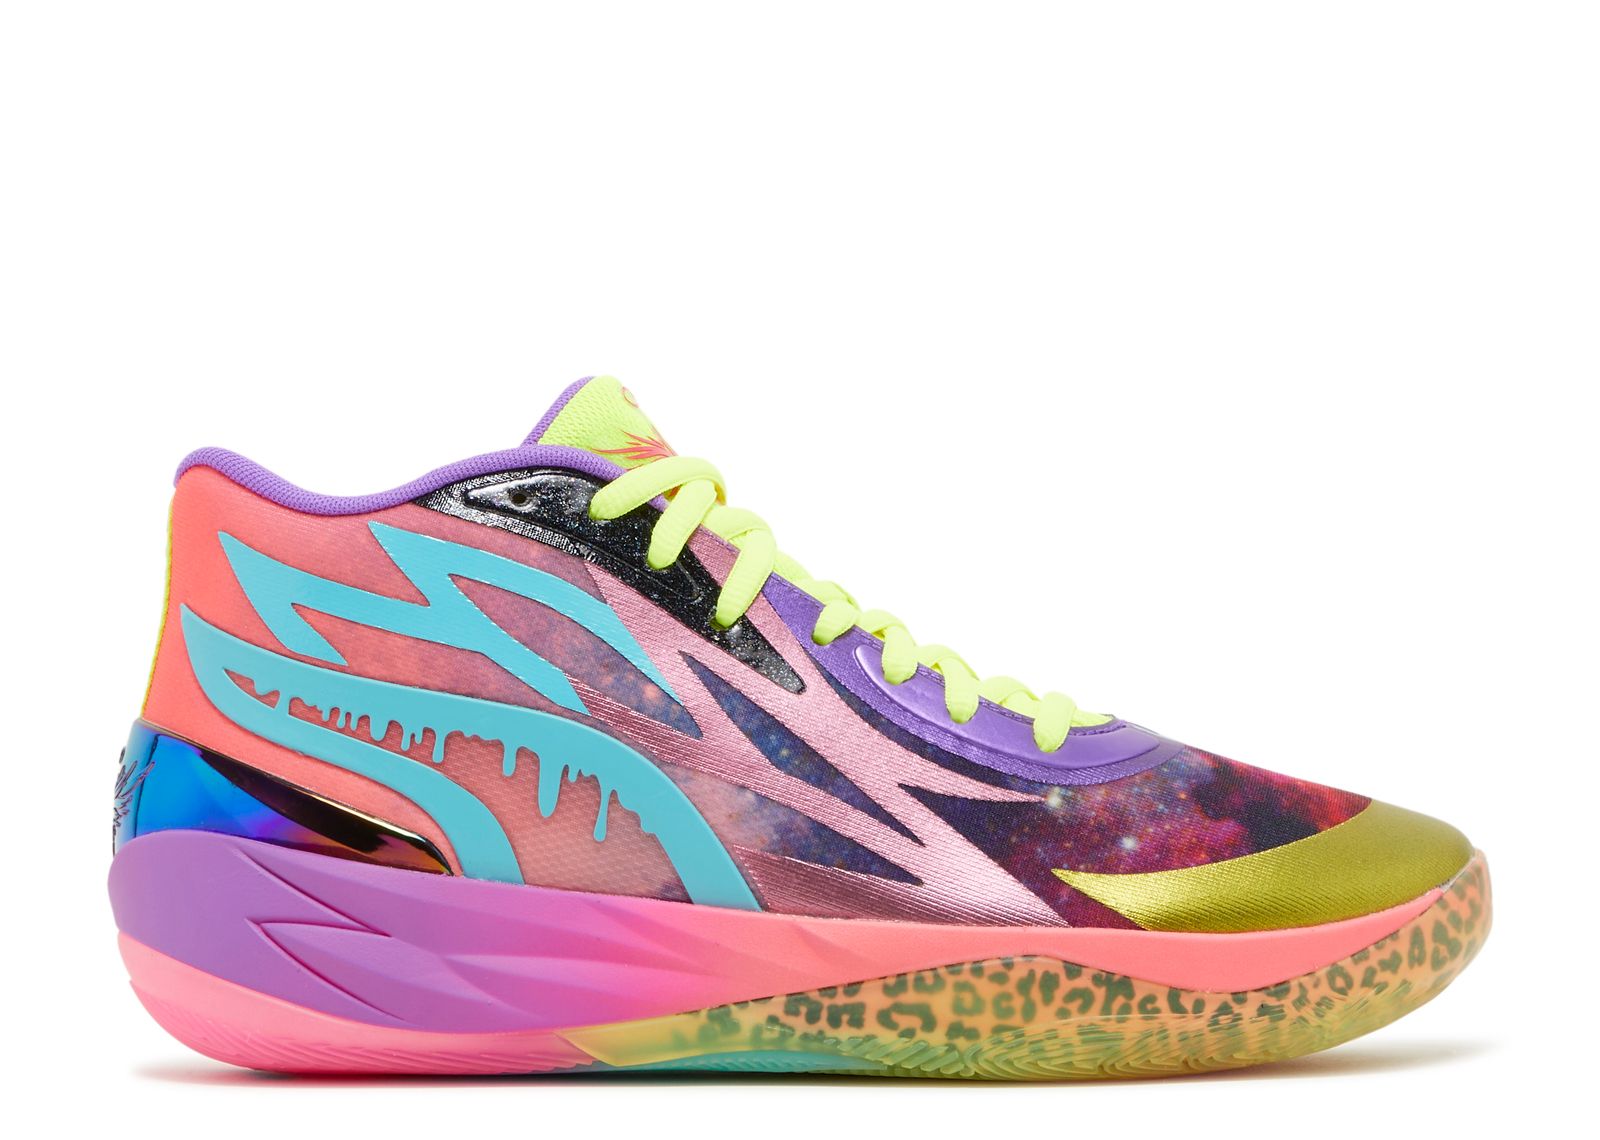 MB.02 'Be You' - Puma - 378283 01 - purple glimmer/safety yellow/pink ...